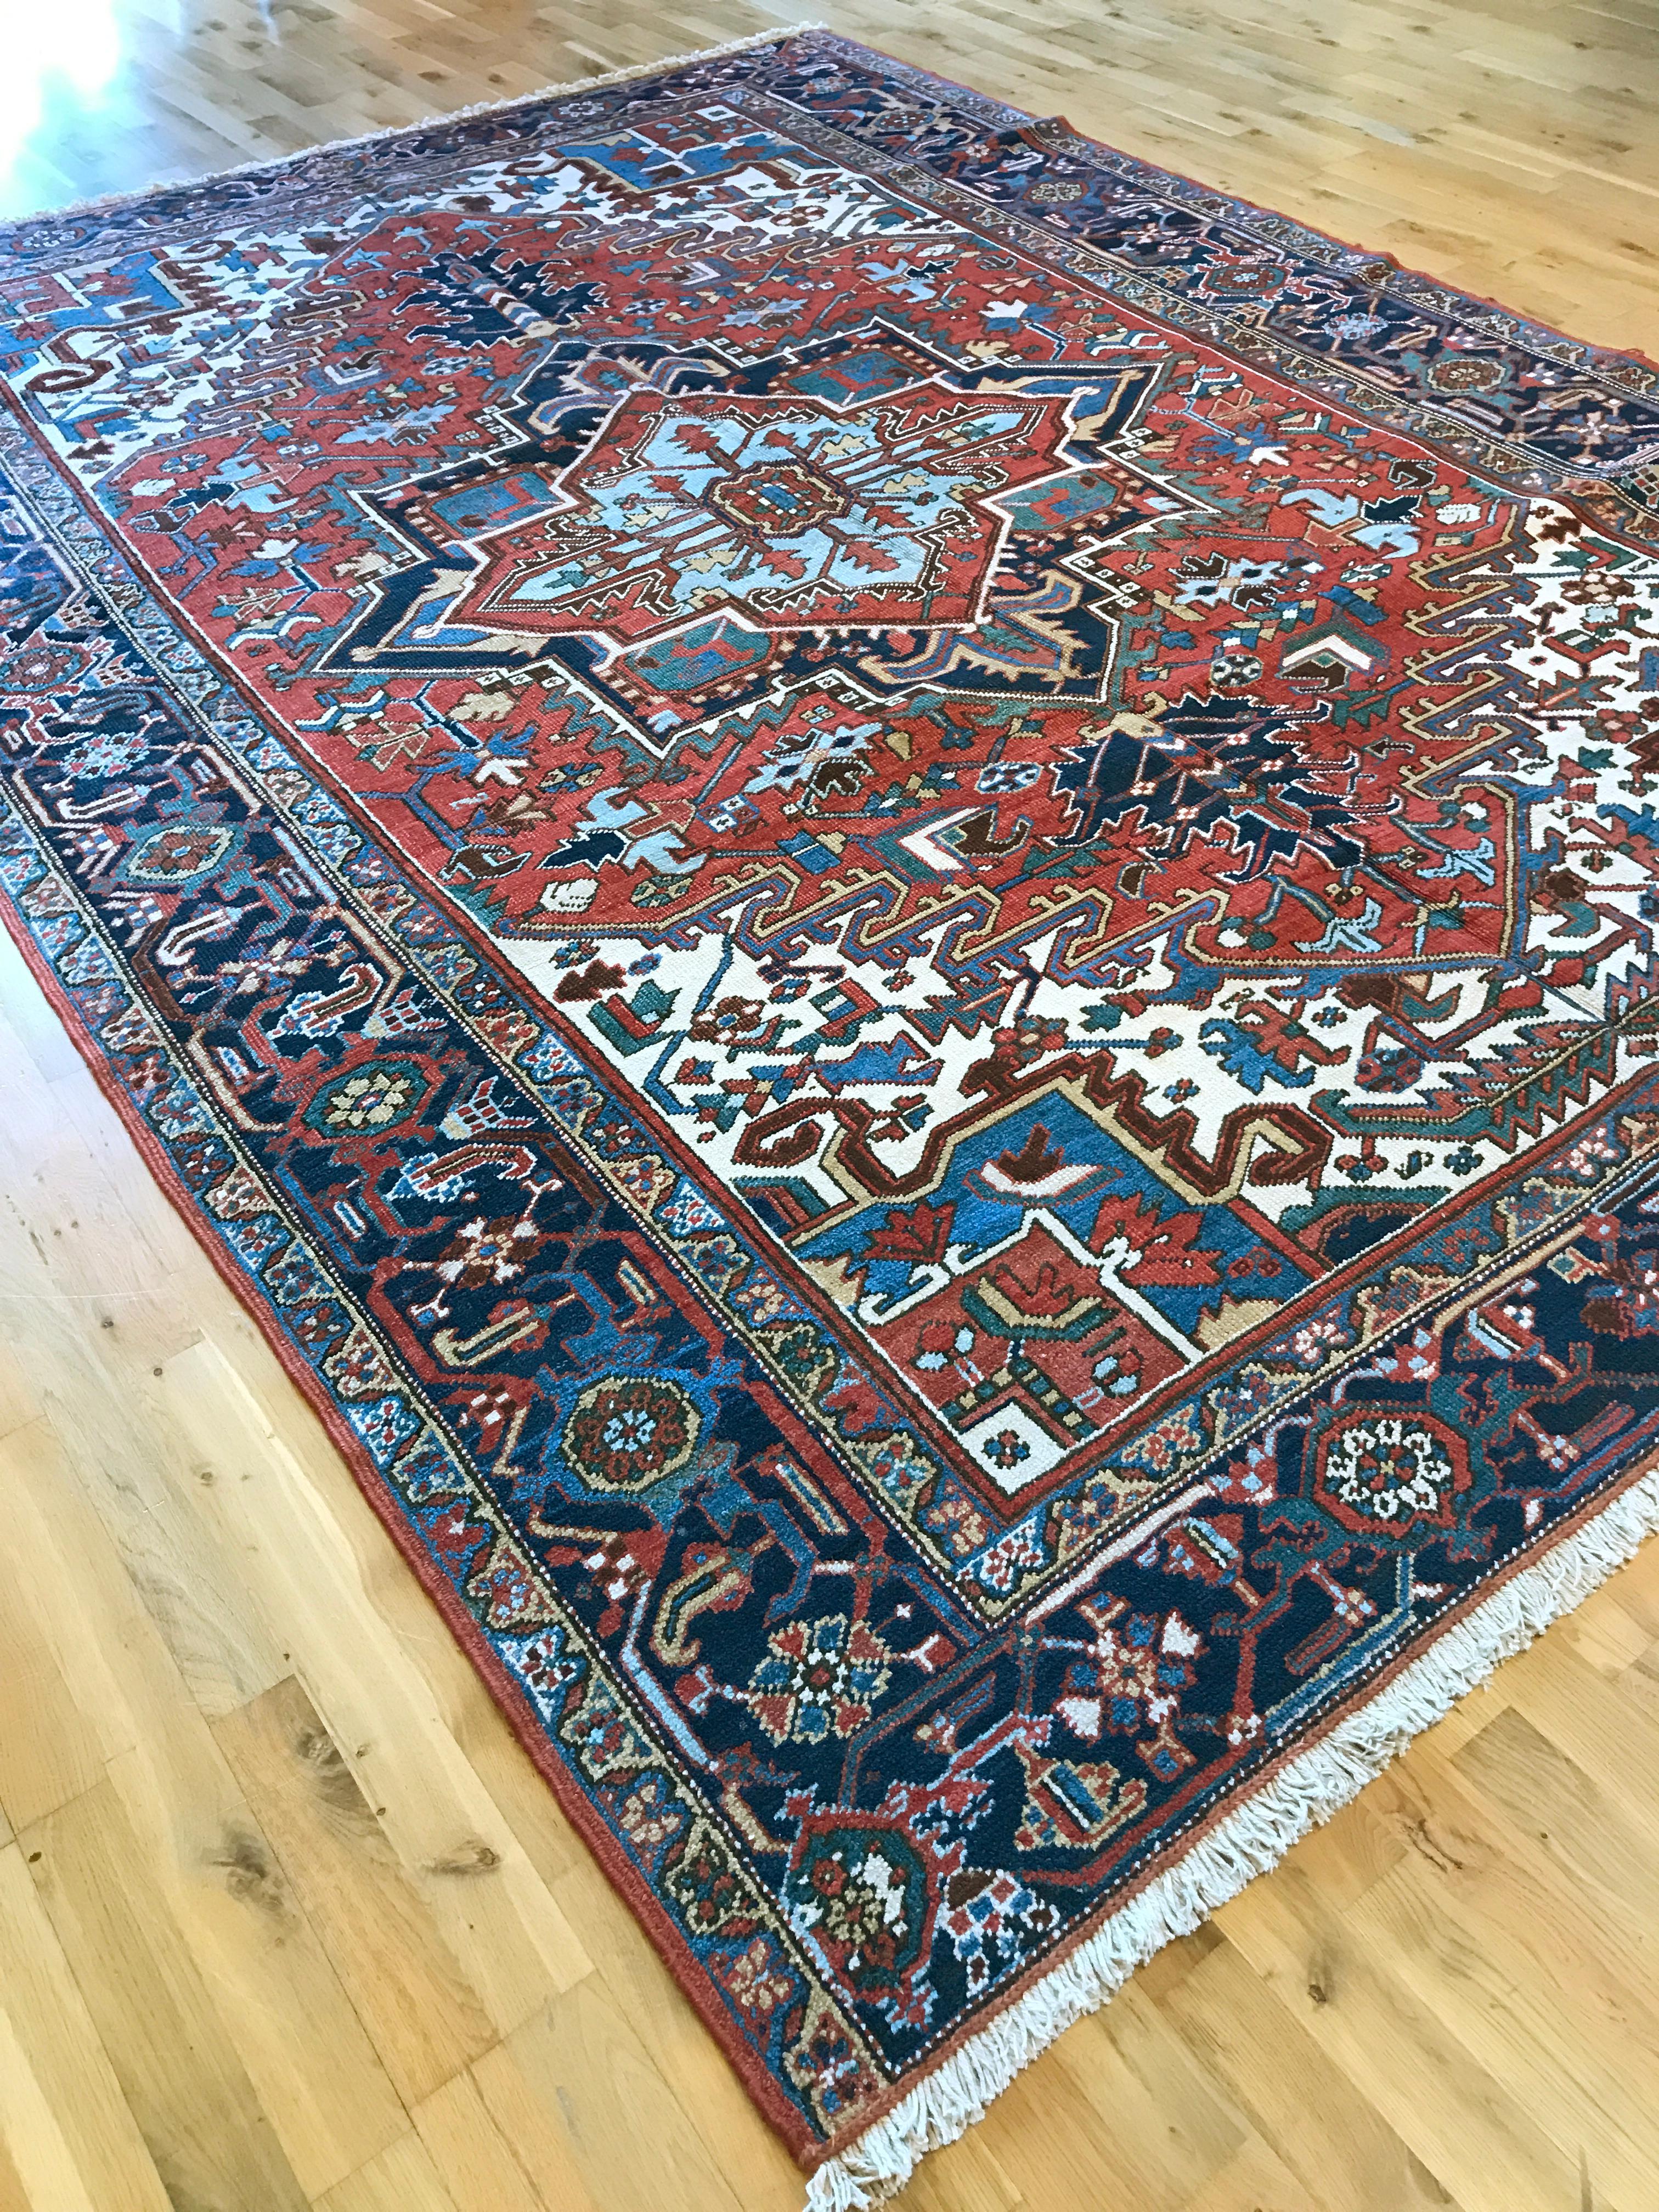 Originating in the area of Heris in northeastern Iran, the informal ‘village’ Heriz rugs are known for high-quality, durable wool, coarser knotting and warm colors. They often feature bold, geometric patterns with large medallions but can also be